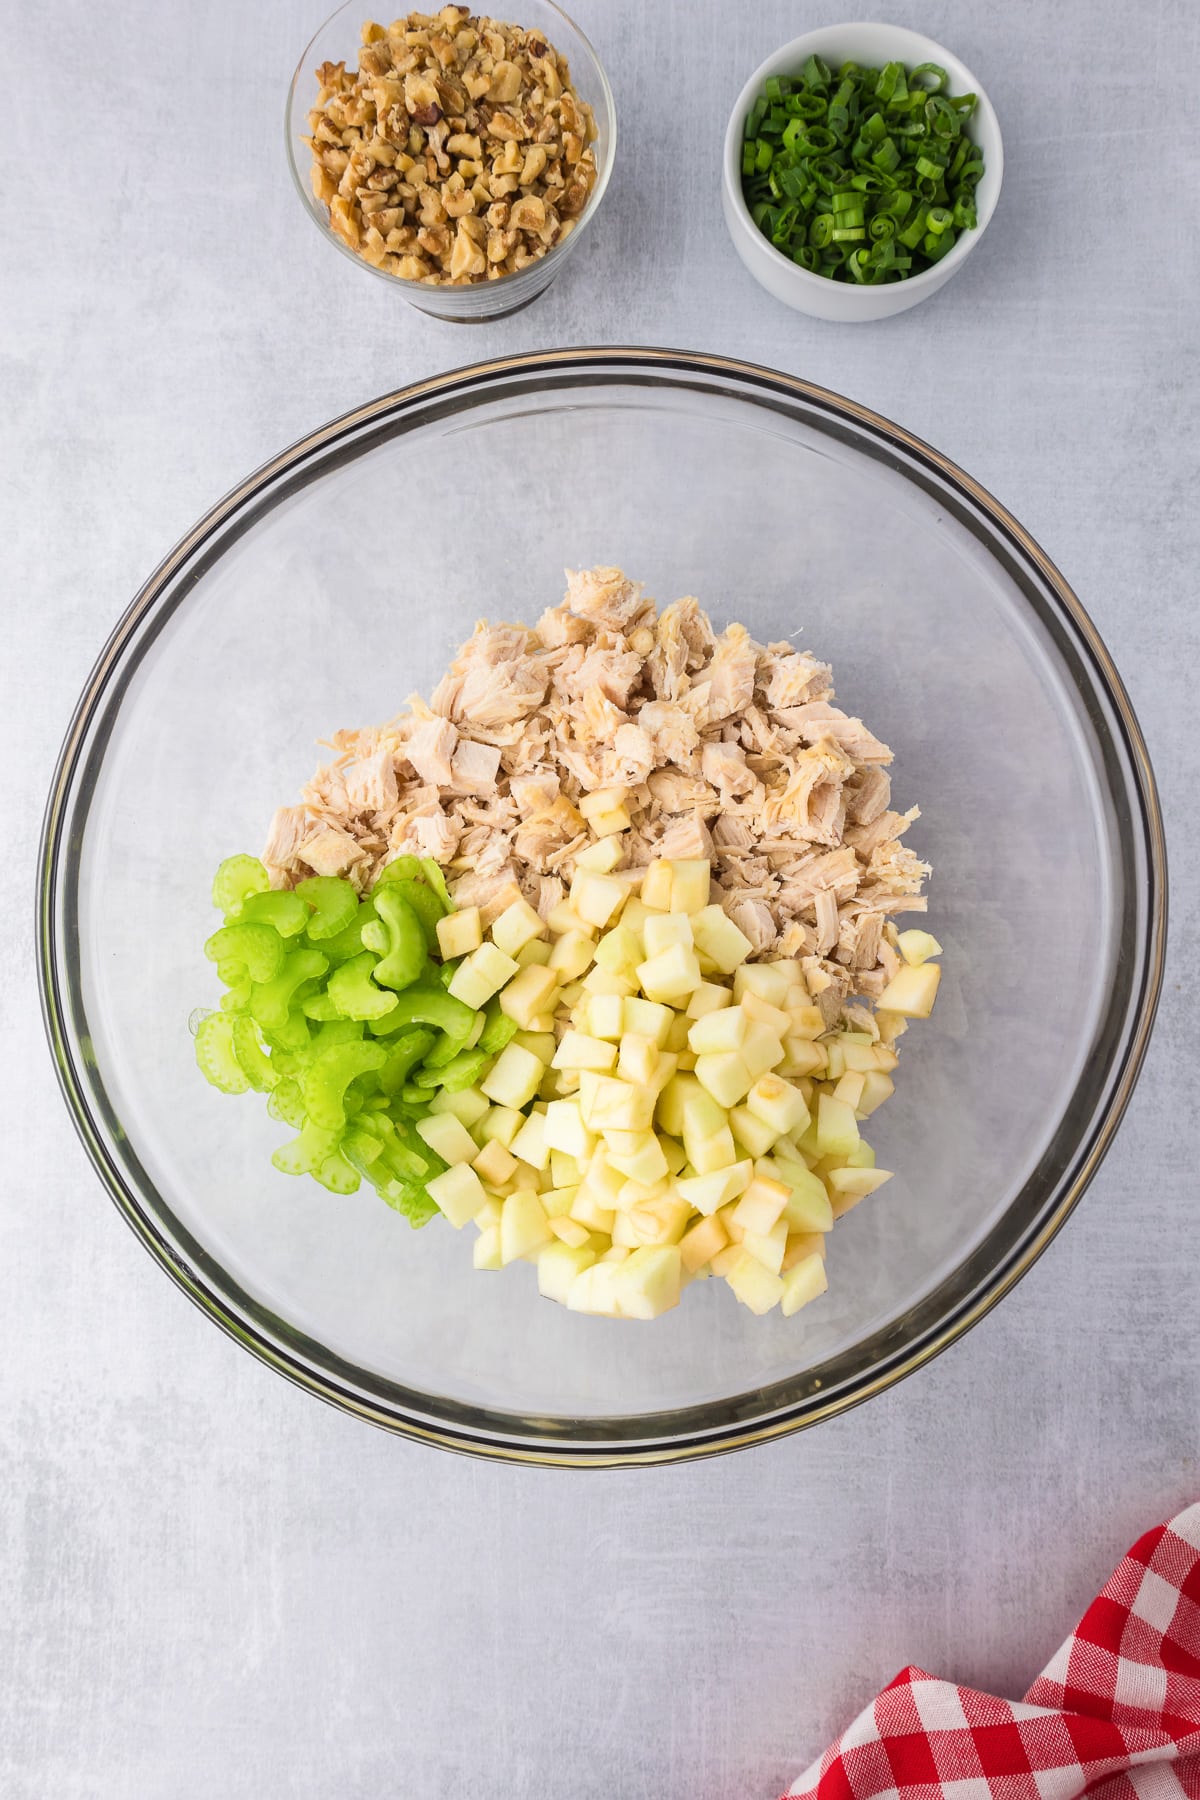 A glass bowl filled with chopped chicken, onions and celery with walnuts and green onions in bowls nearby.